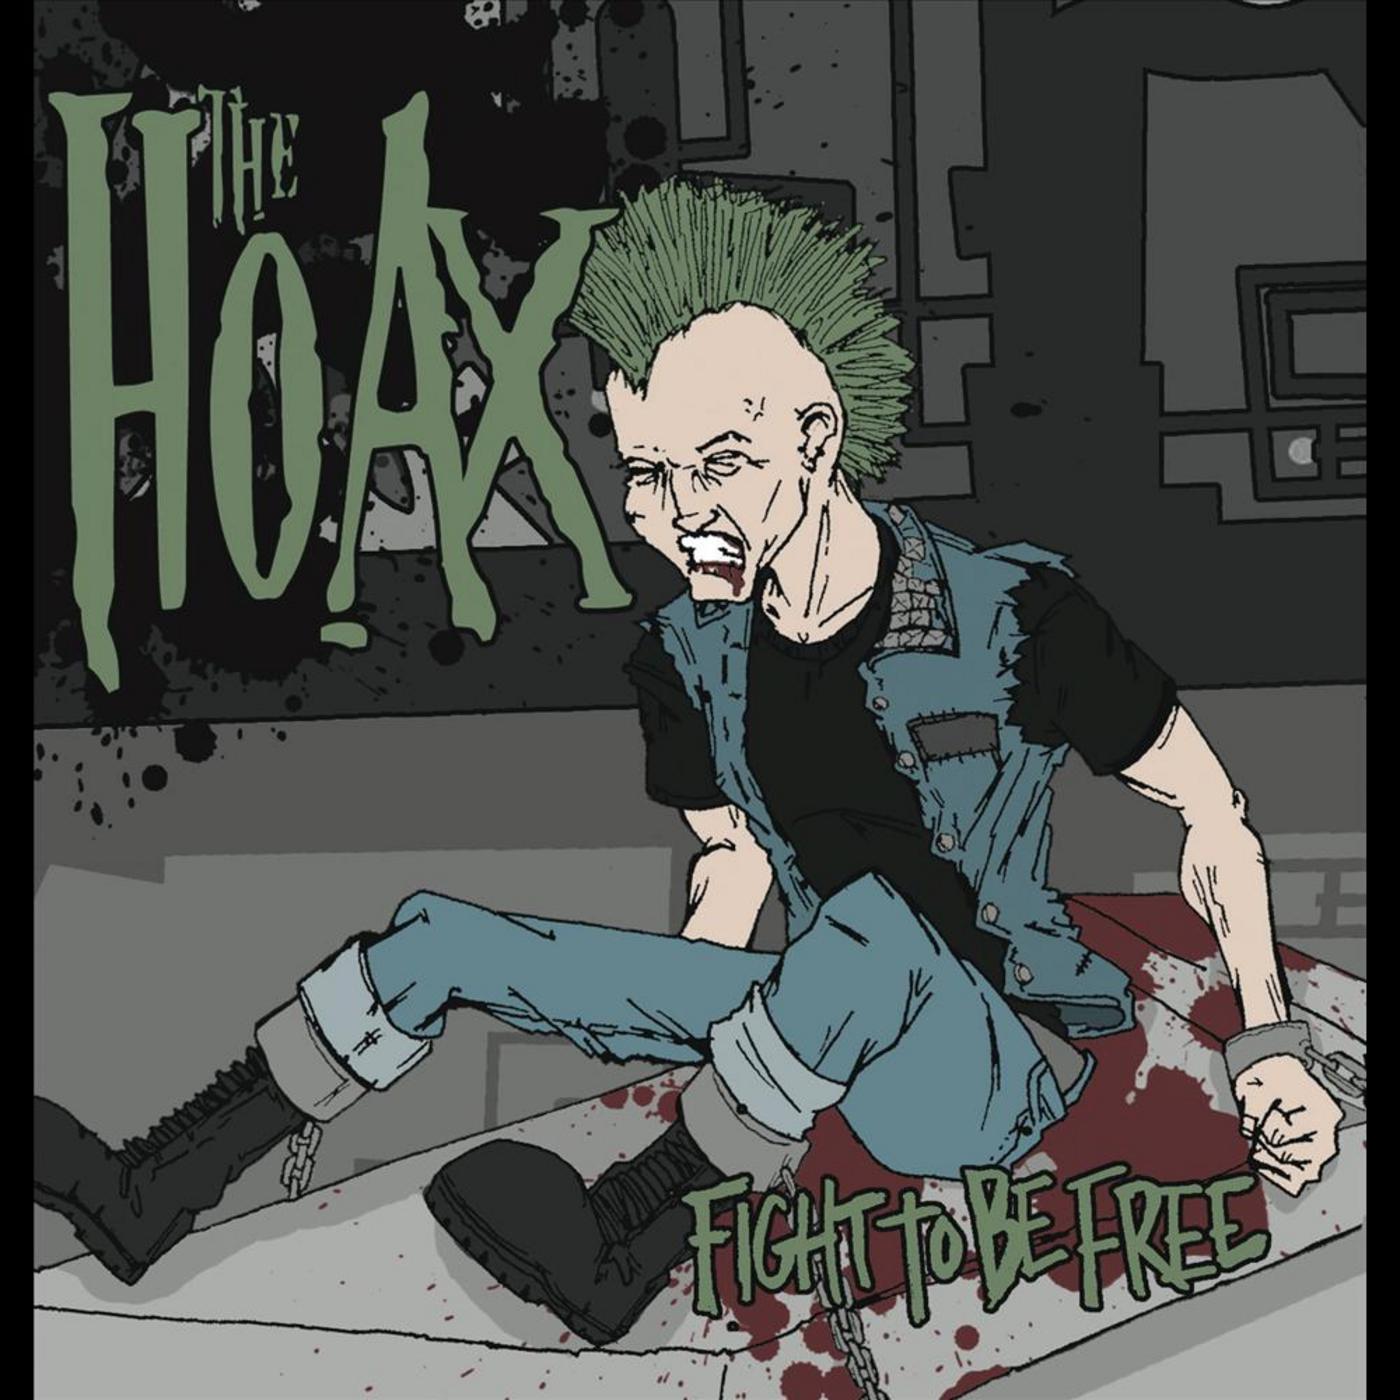 The Hoax - Clock In, Clock Out